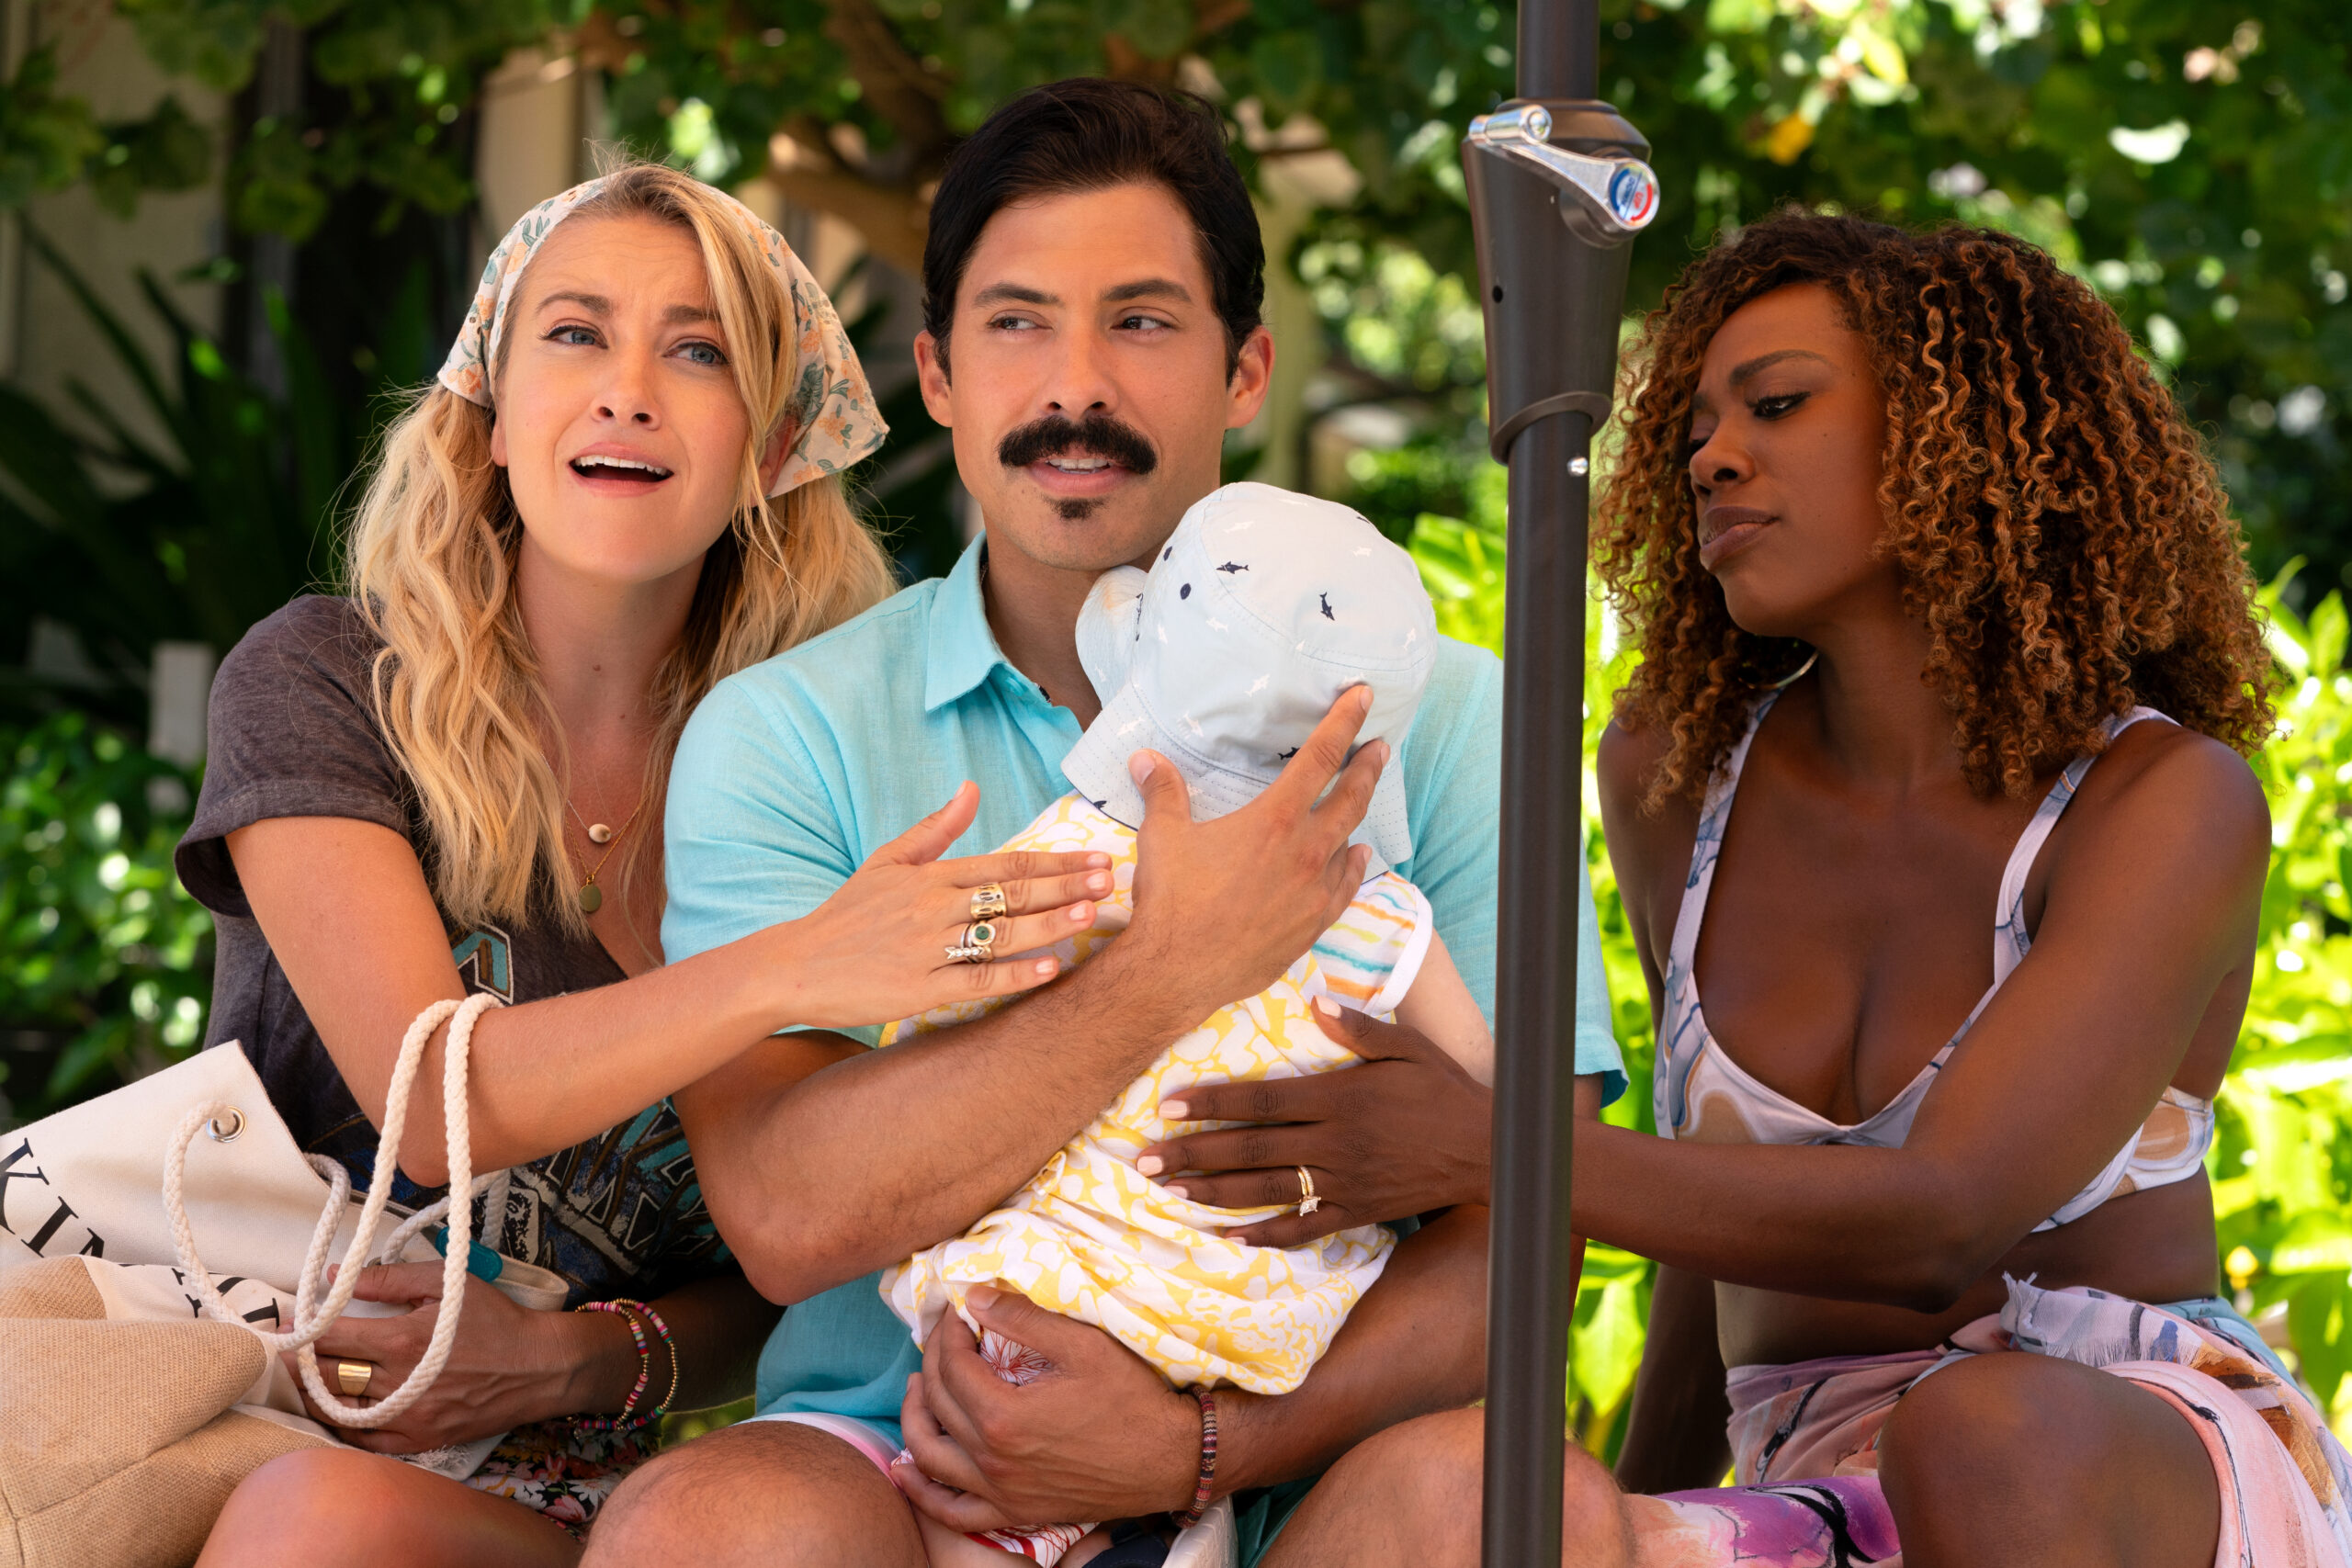 Meredith Hagner, Carlos Santos, and Yvonne Orji in Clay Tarver's Hulu action adventure comedy film, Vacation Friends 2